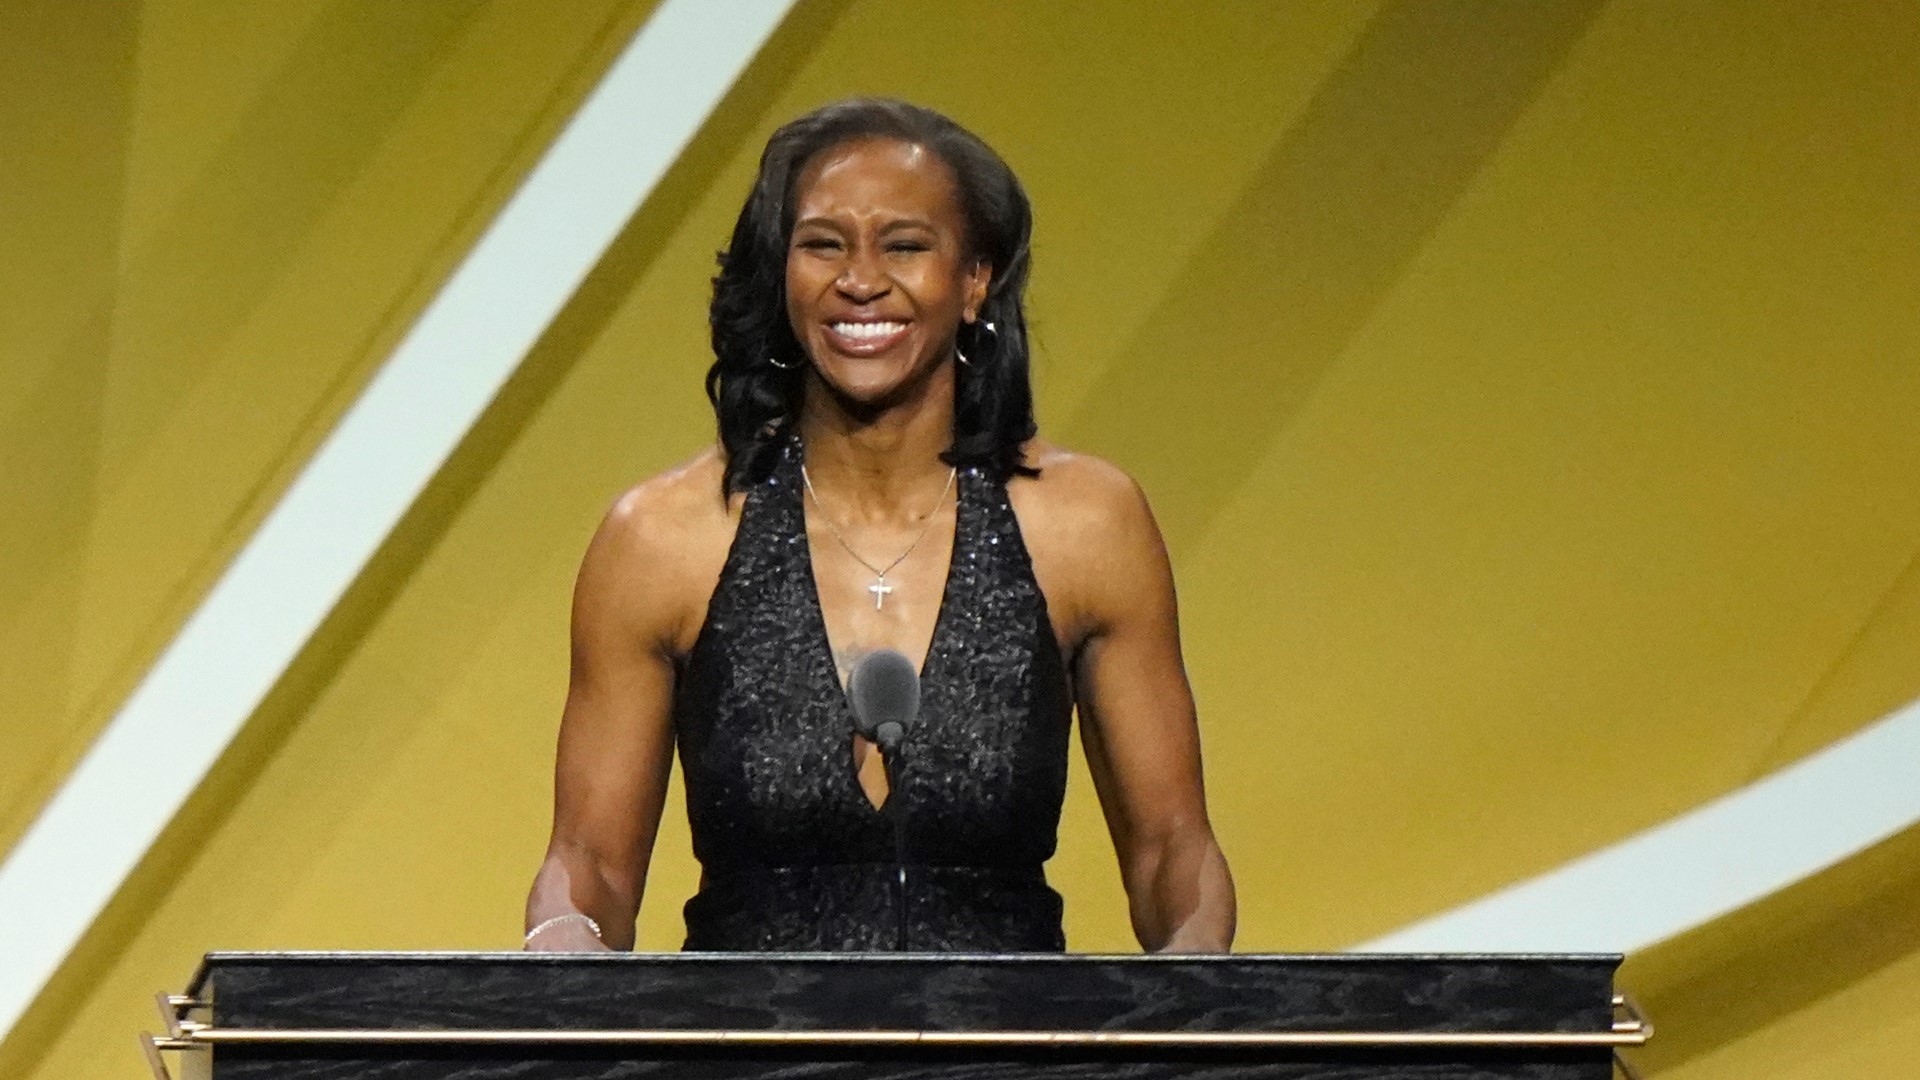 Tamika Catchings was selected to join the Naismith Memorial Basketball Hall of Fame on her first year of eligibility.